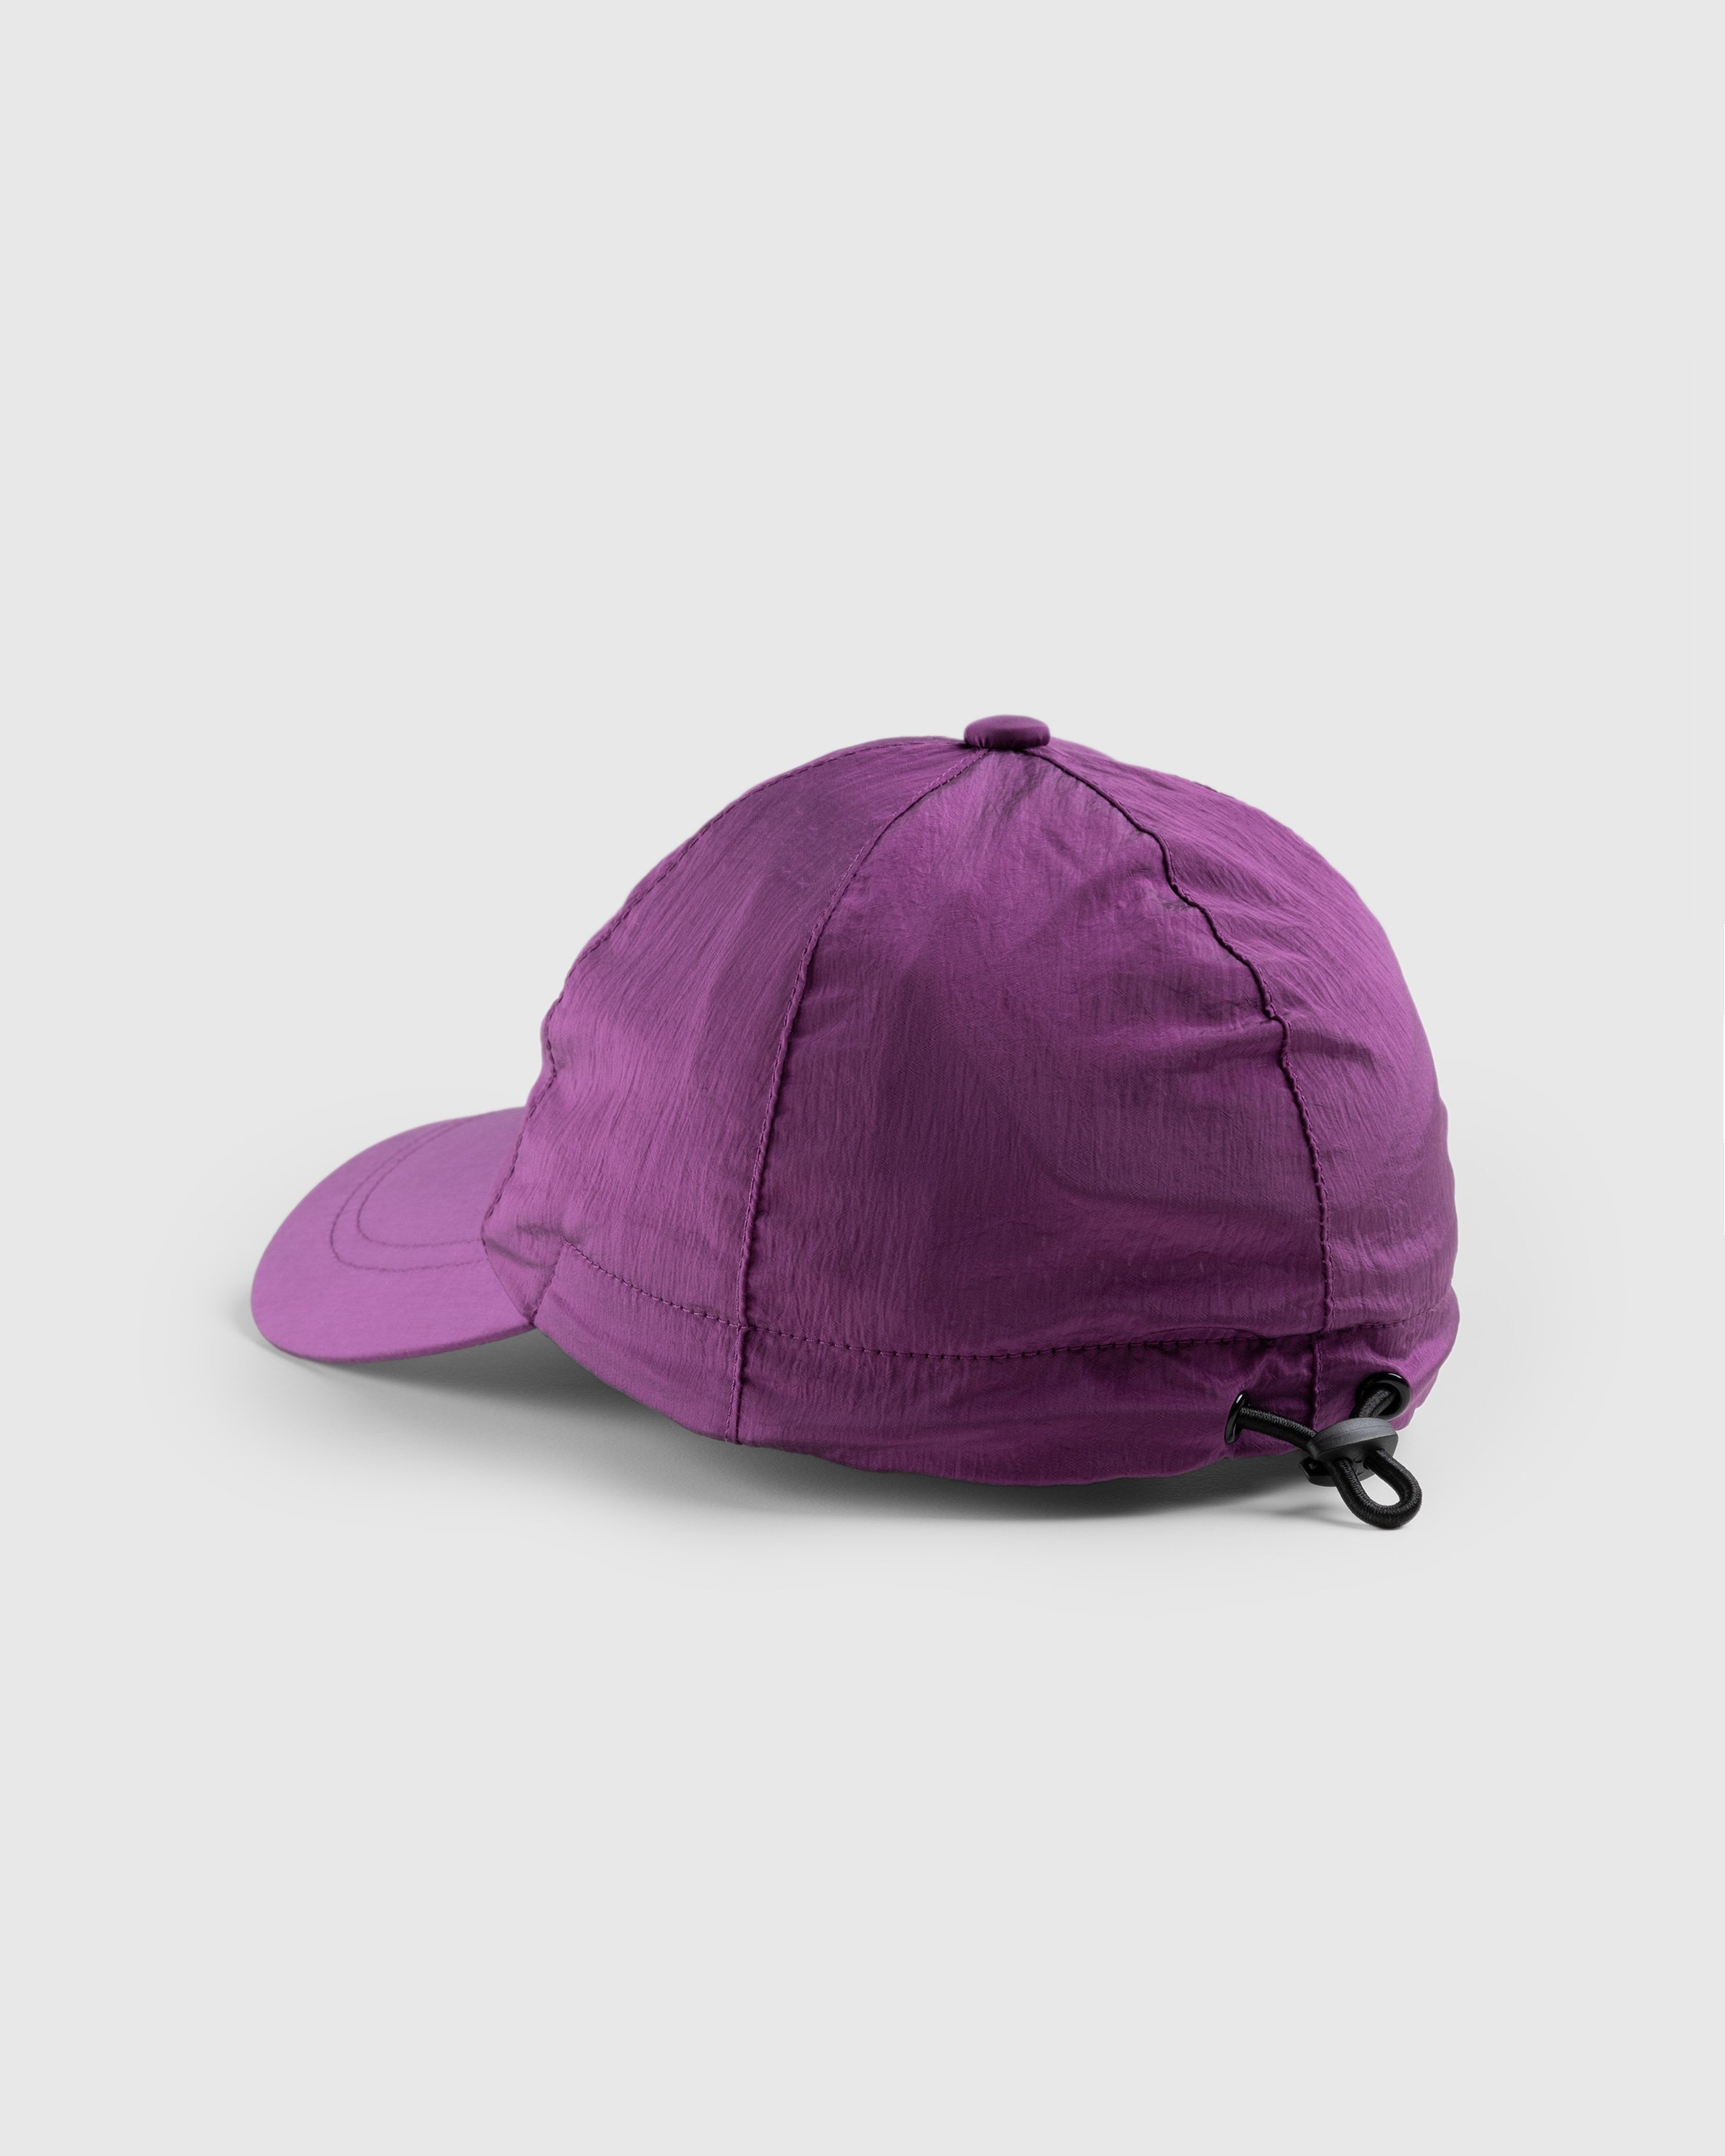 Stone Island - Cappello Pink 781599576 - Accessories - Pink - Image 3